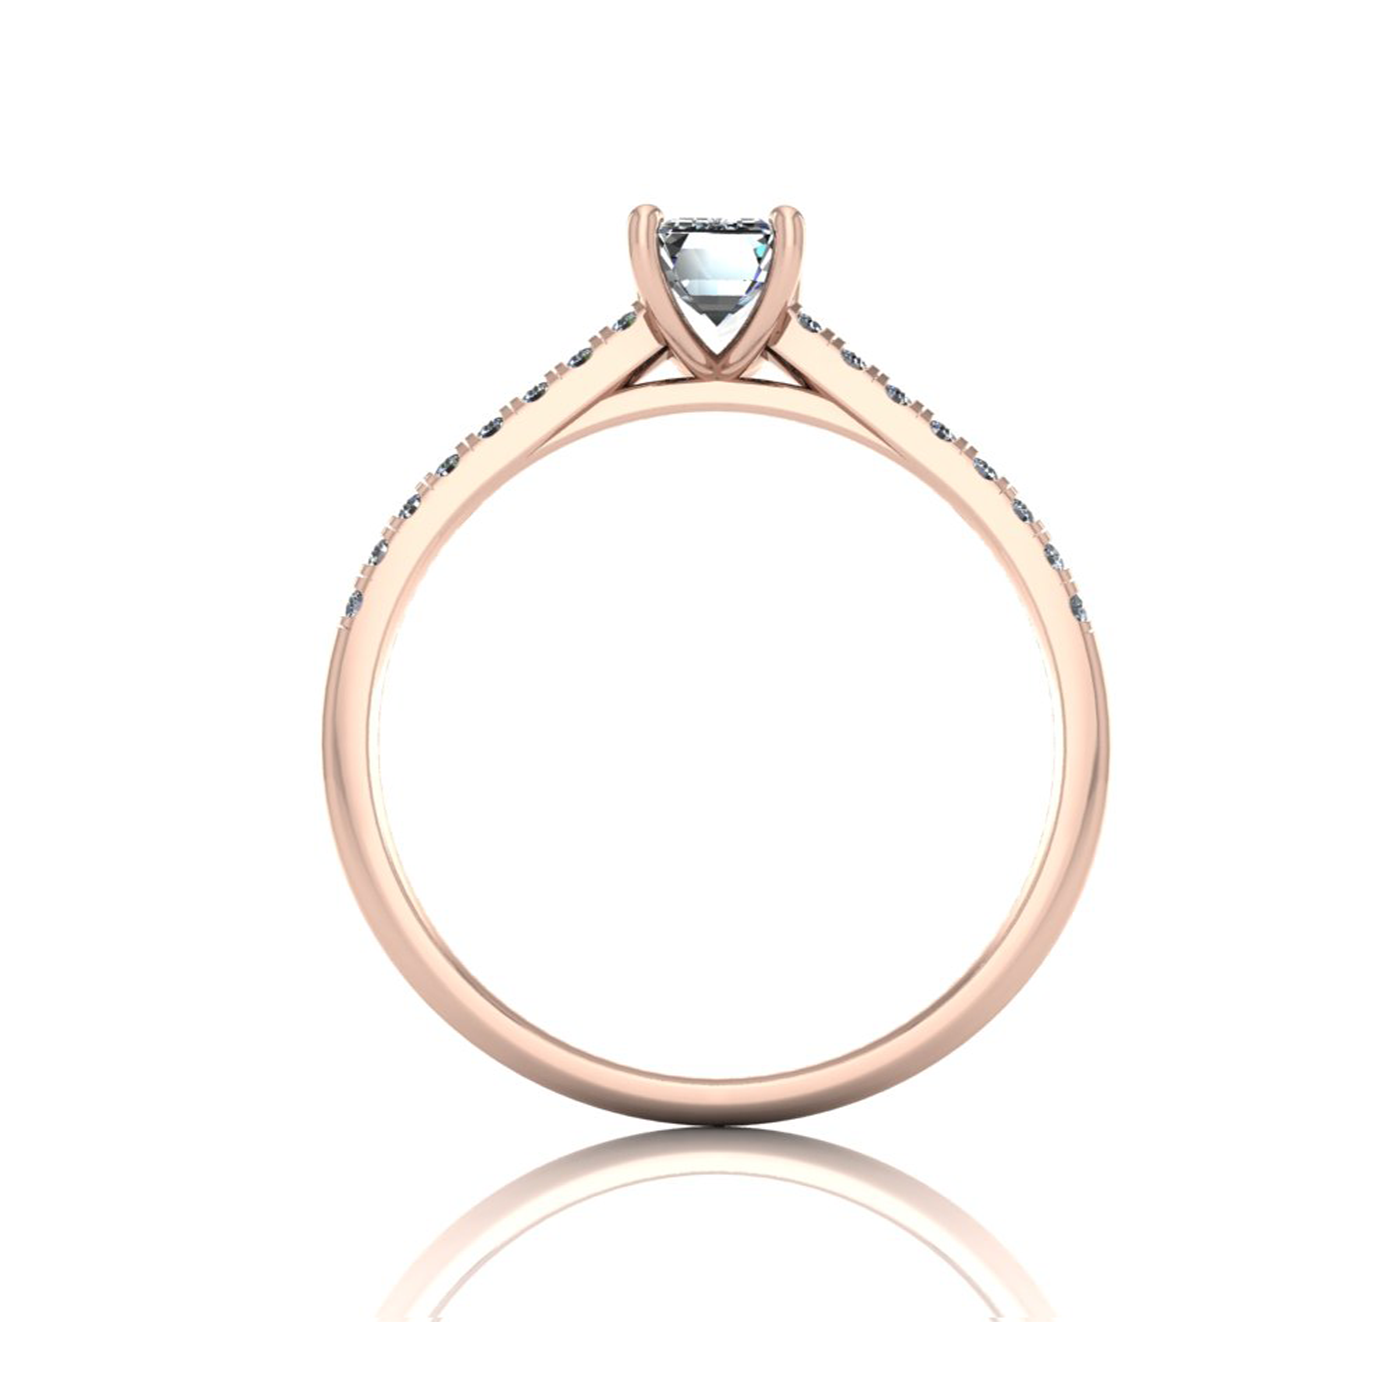 18k rose gold 0,50 ct 4 prongs emerald cut diamond engagement ring with whisper thin pavÉ set band